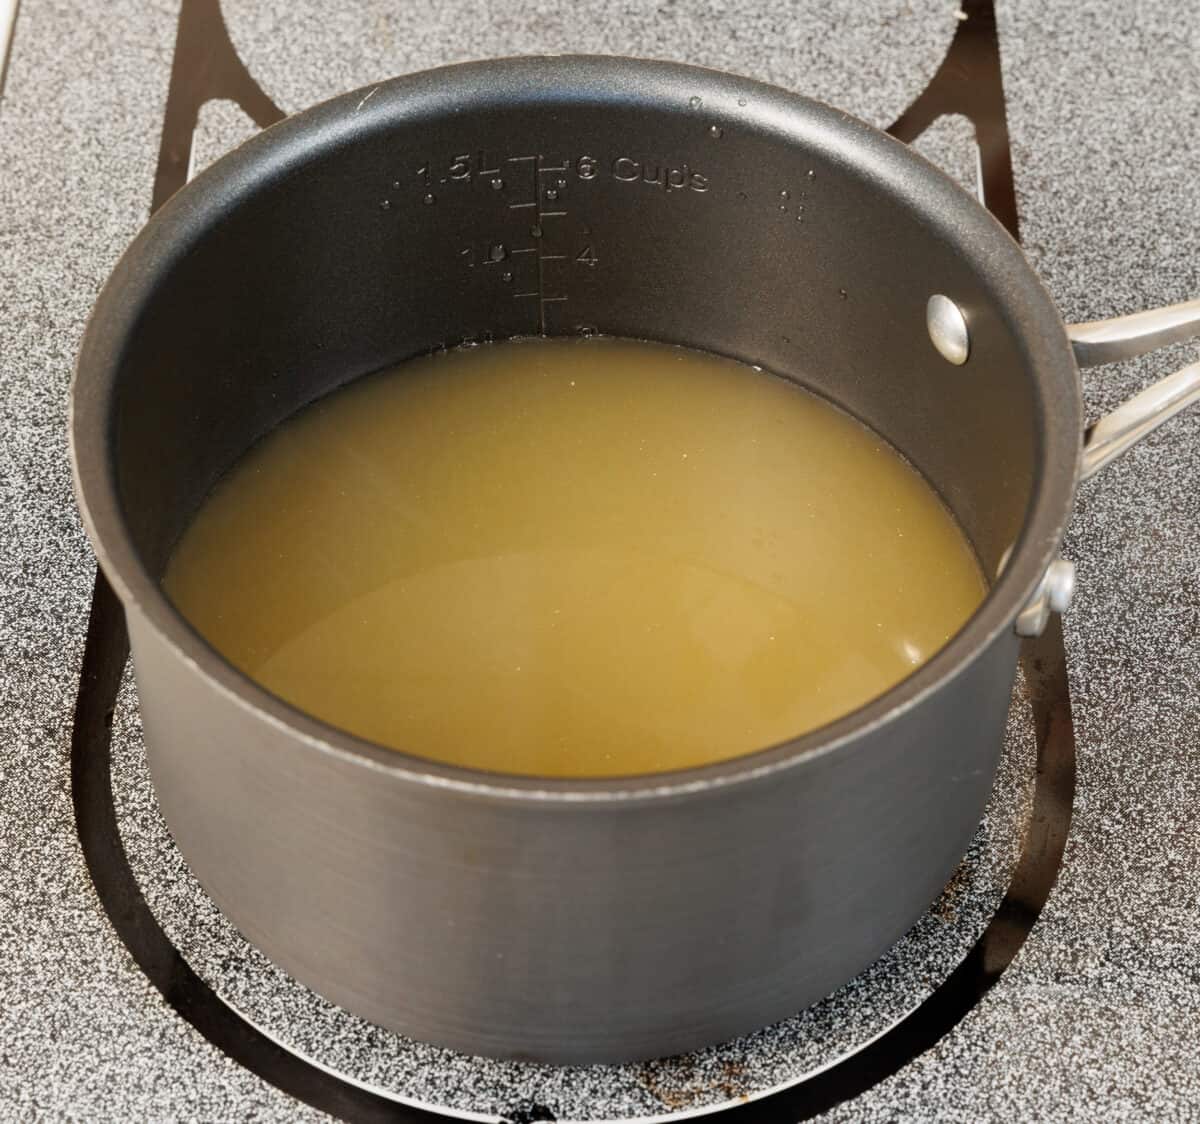 chicken broth in a small pot on the stove.